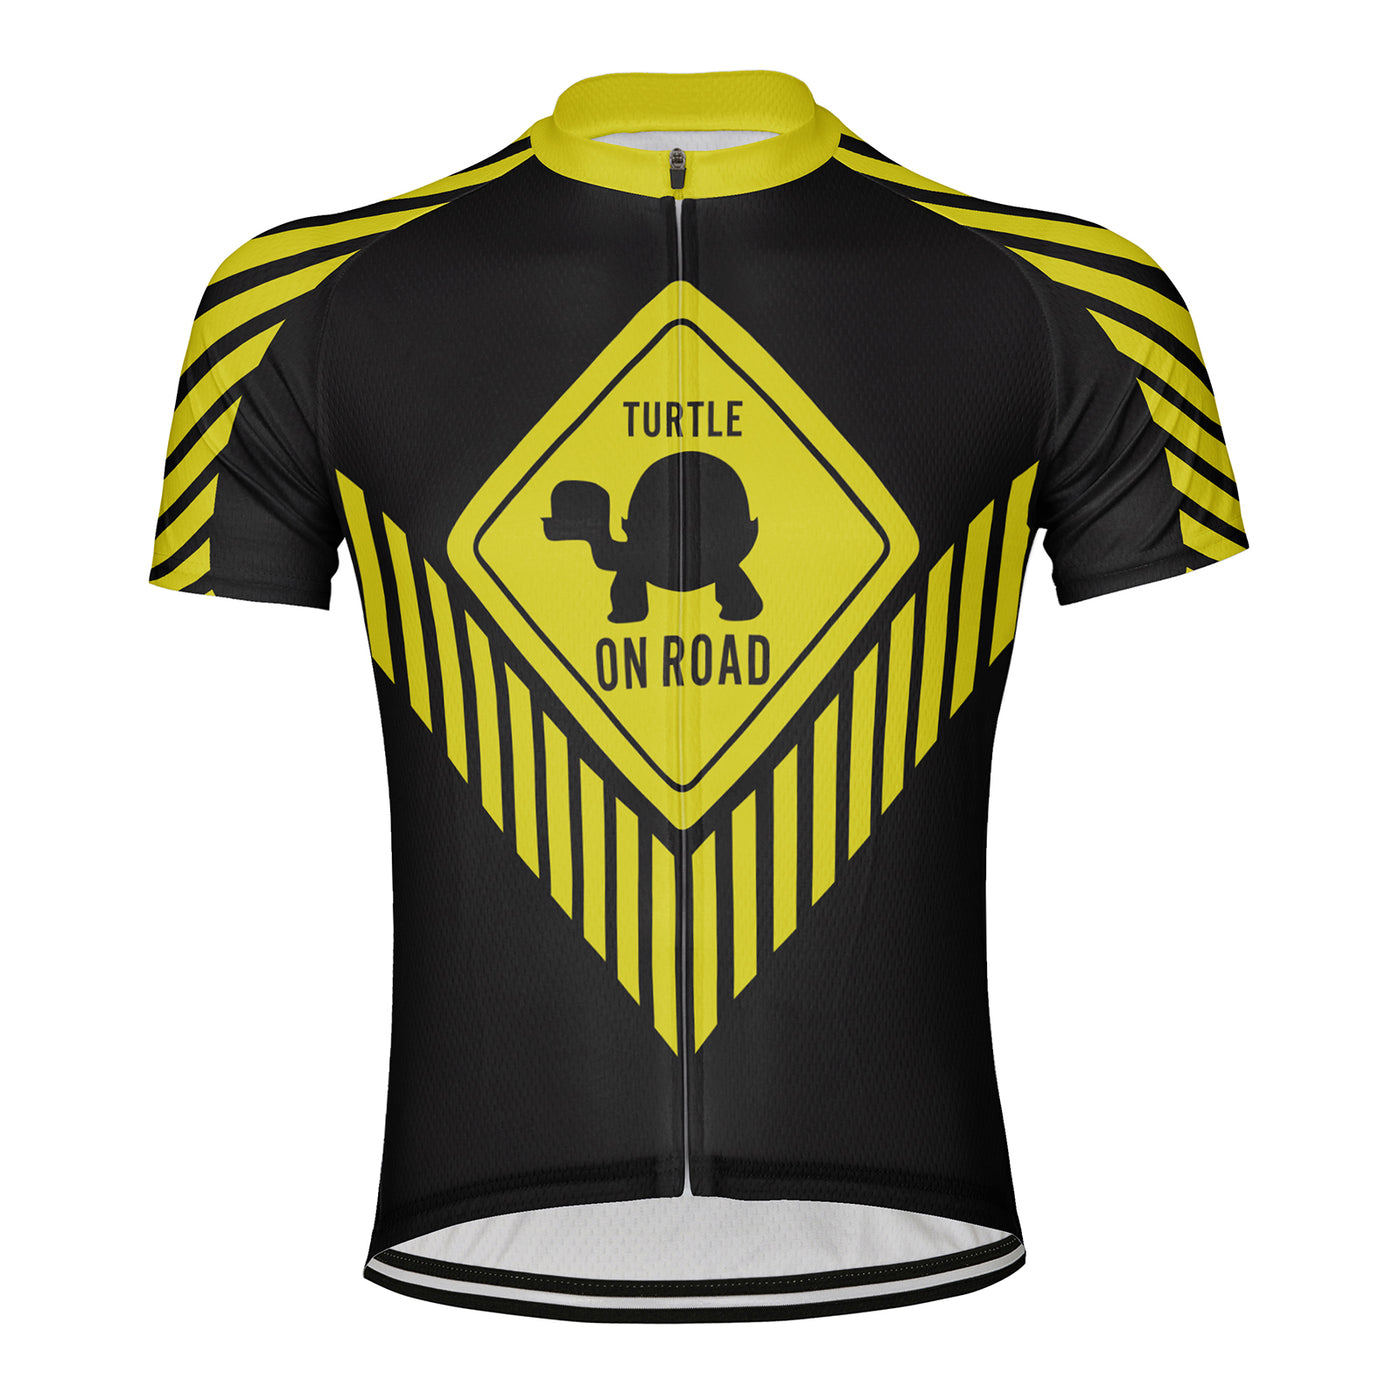 Customized Turtle On Road Men's Cycling Jersey Short Sleeve